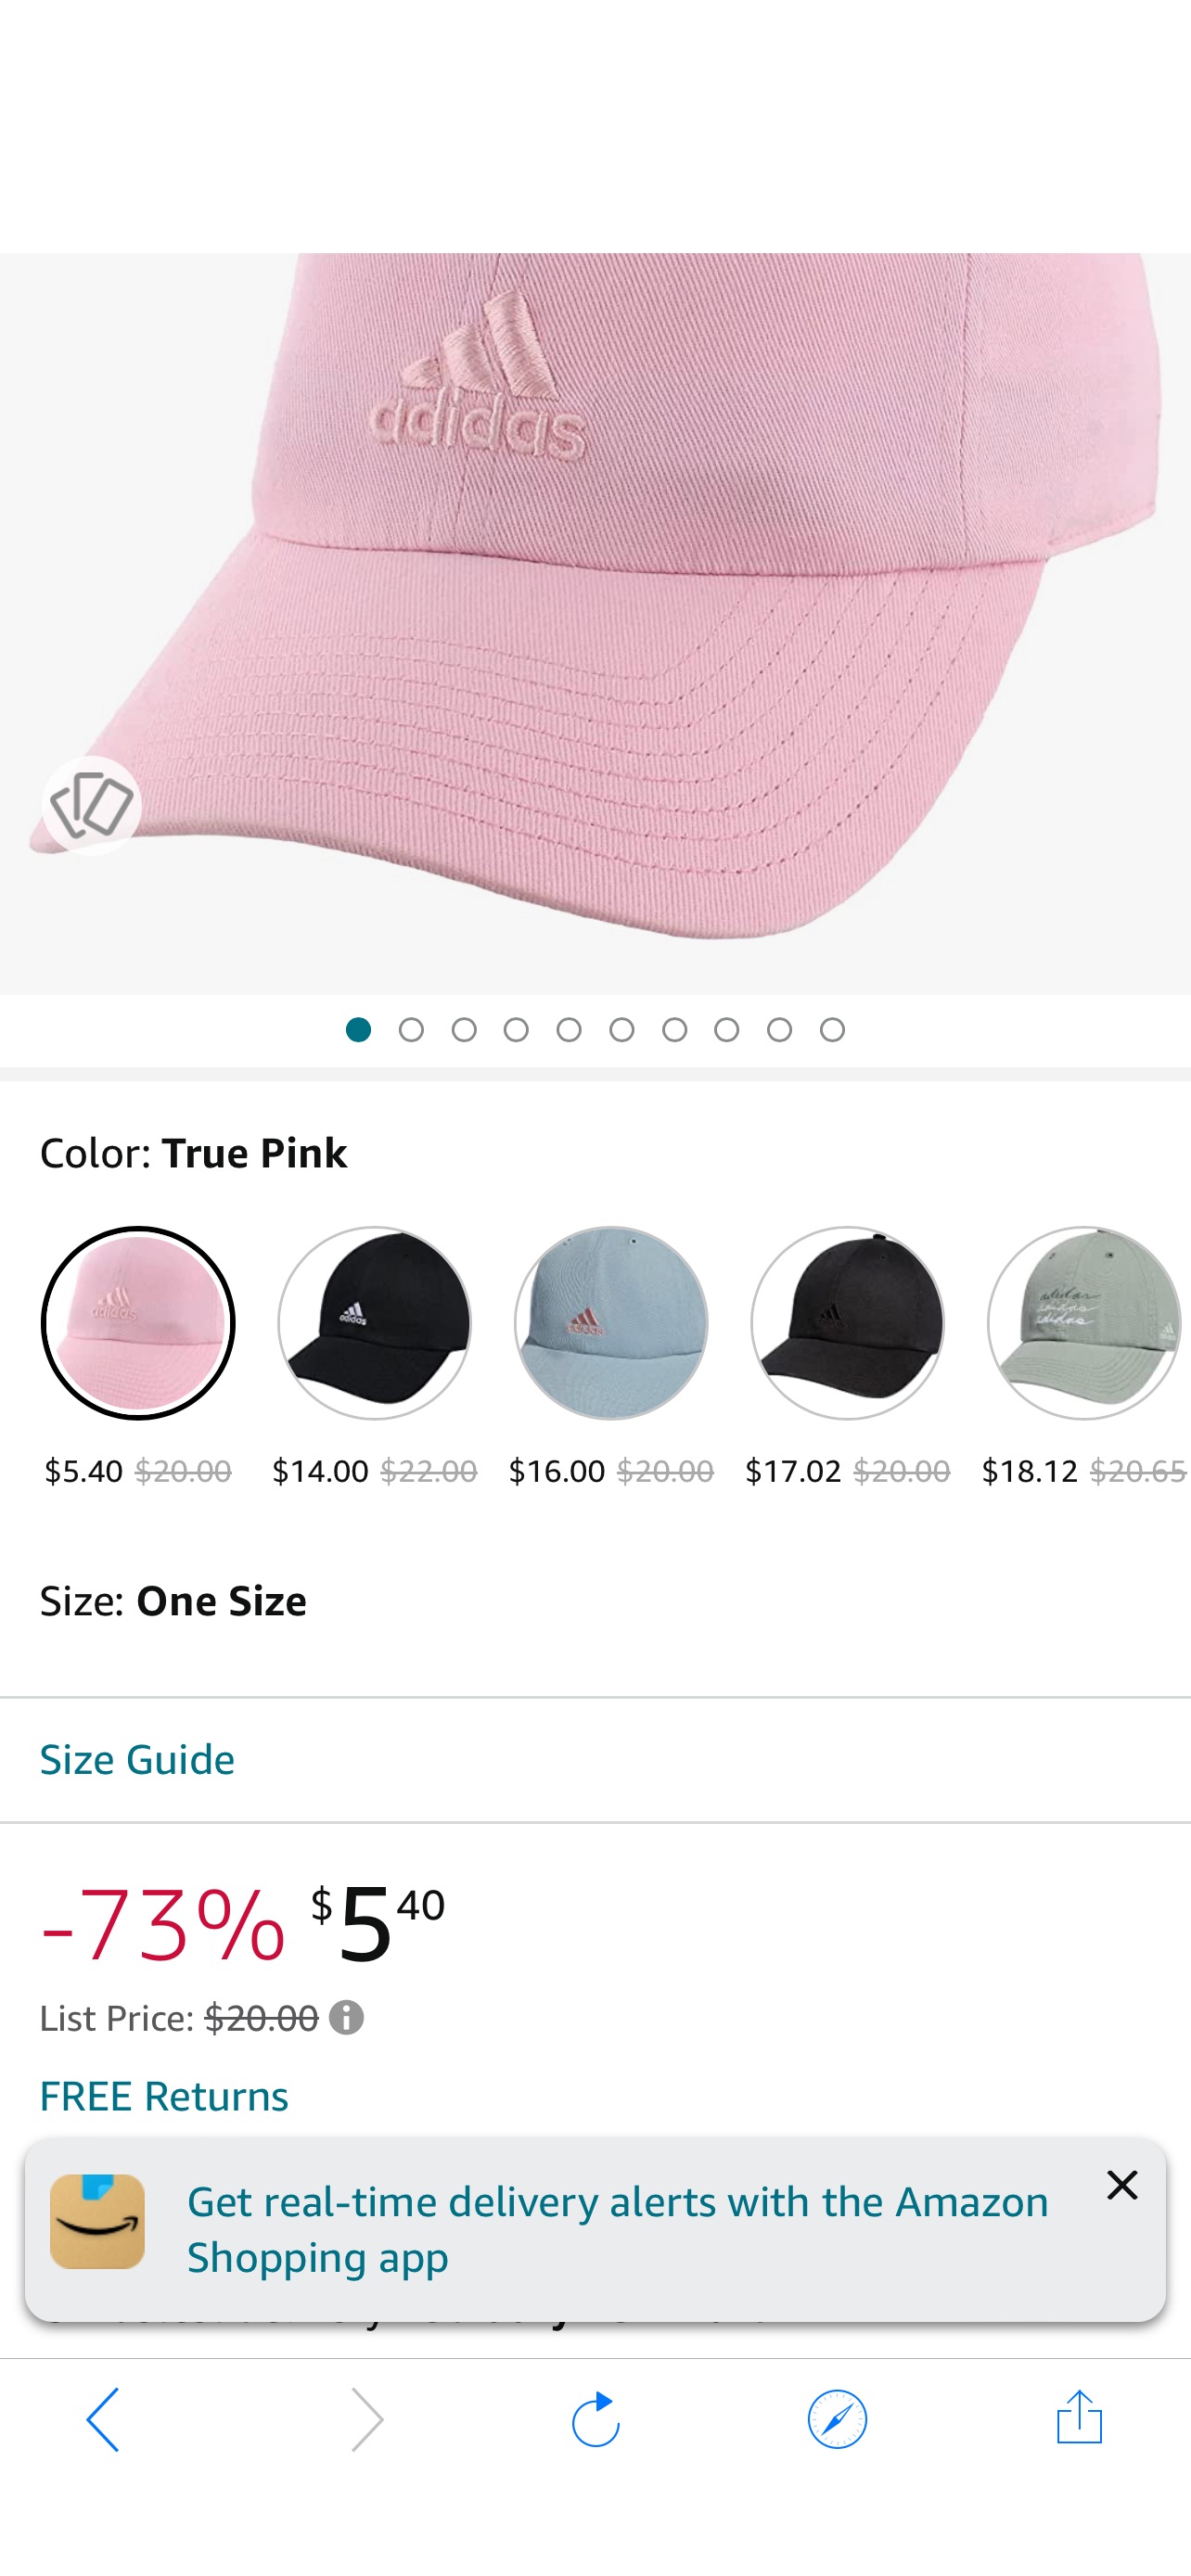 adidas Women's Saturday Relaxed Fit Adjustable Hat, Pink, One Size at Amazon Women’s Clothing store